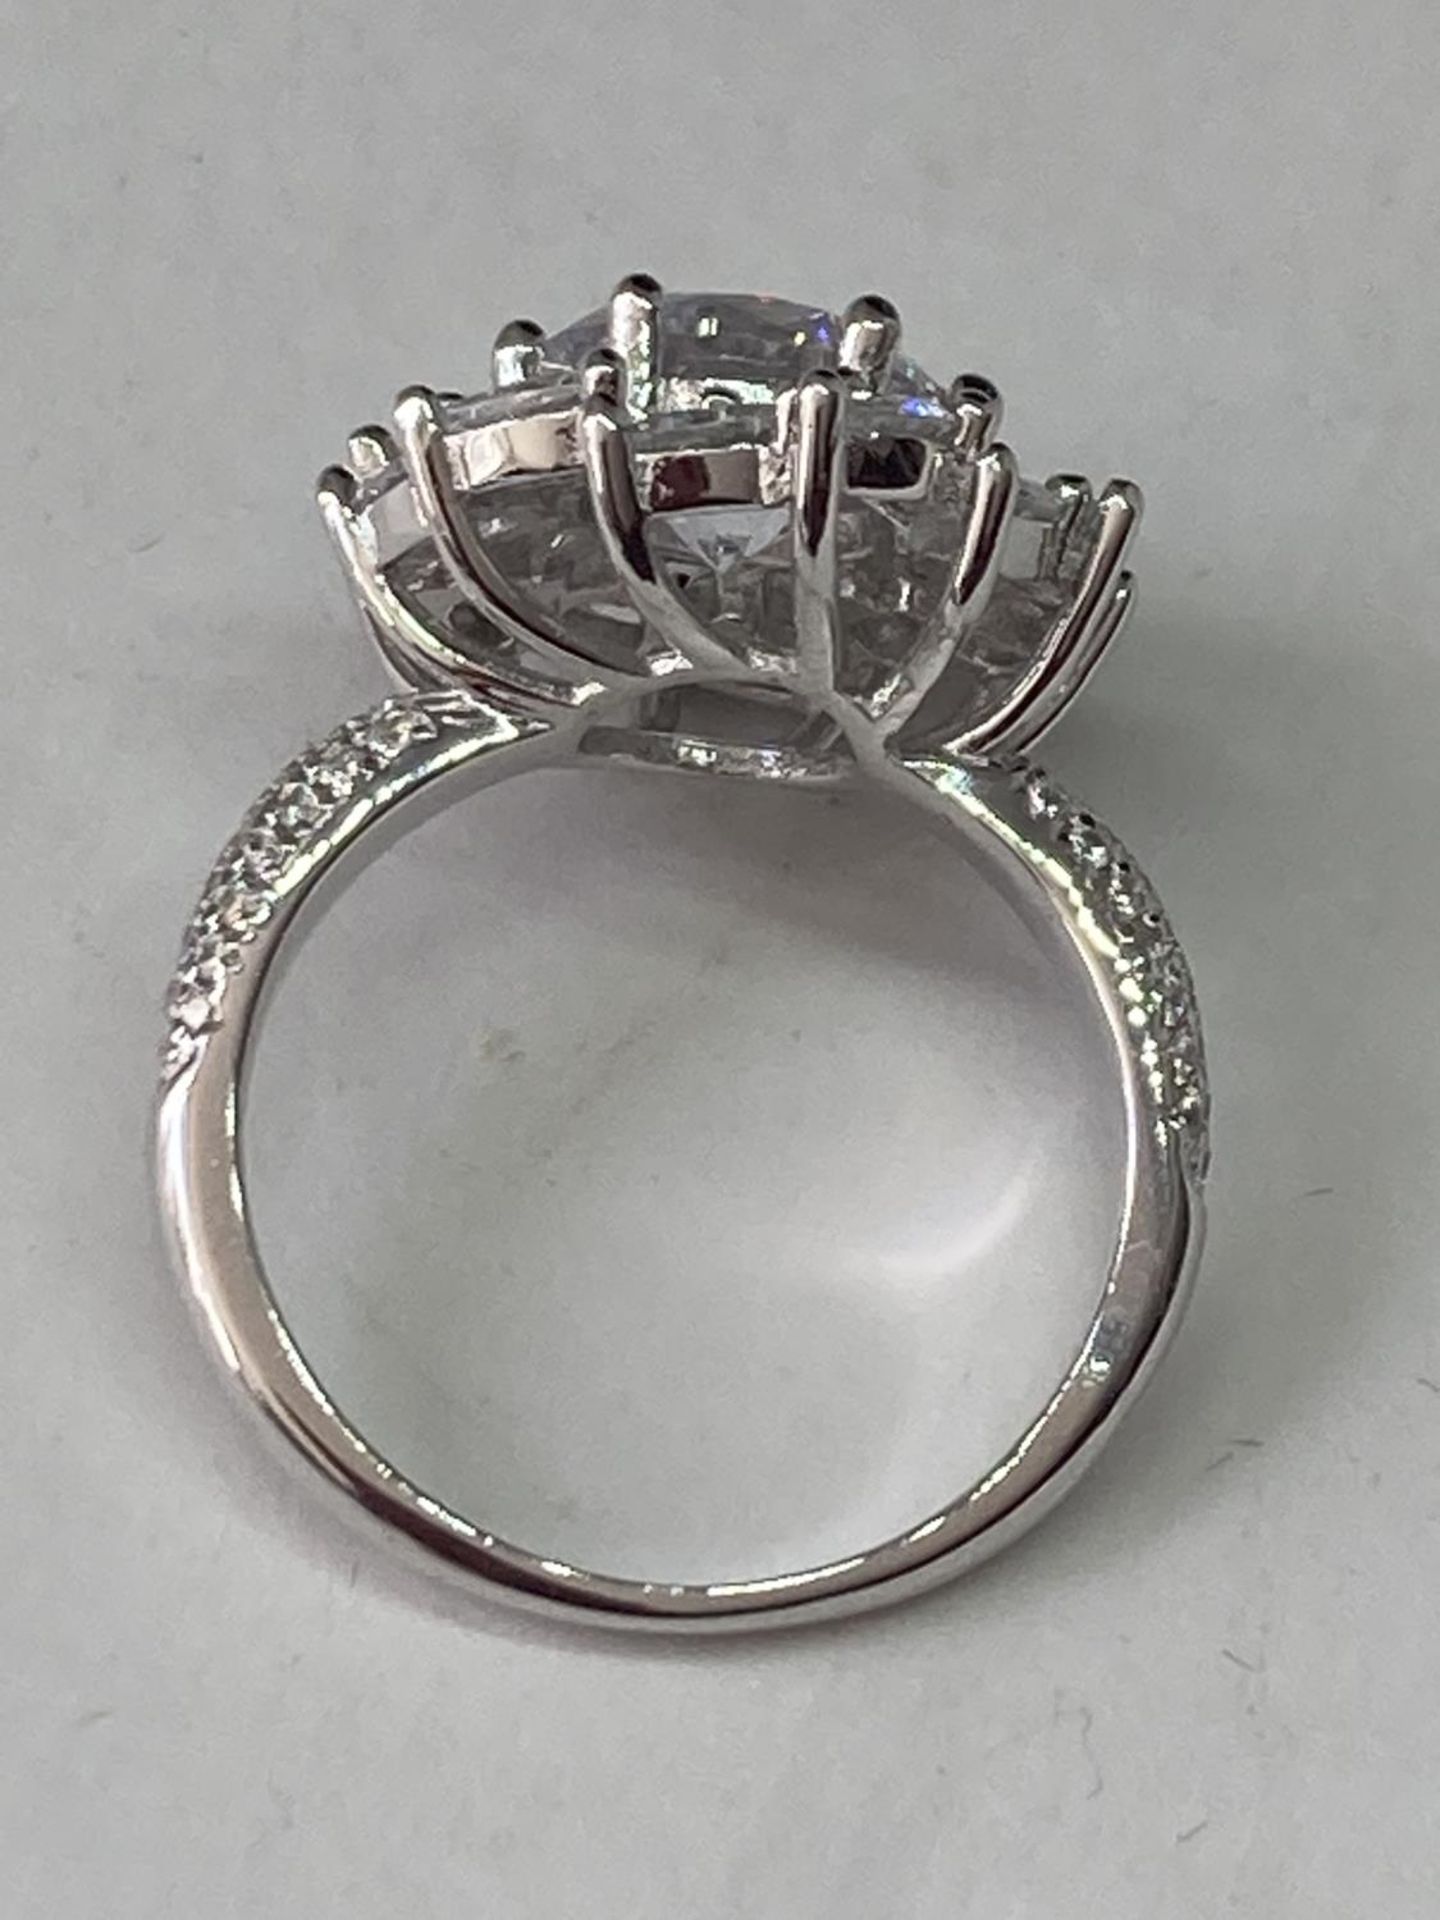 A WHITE METAL RING WITH 3 CARATS OF MOISSANITE IN A CLUSTER DESIGN SIZE Q - Image 5 of 6